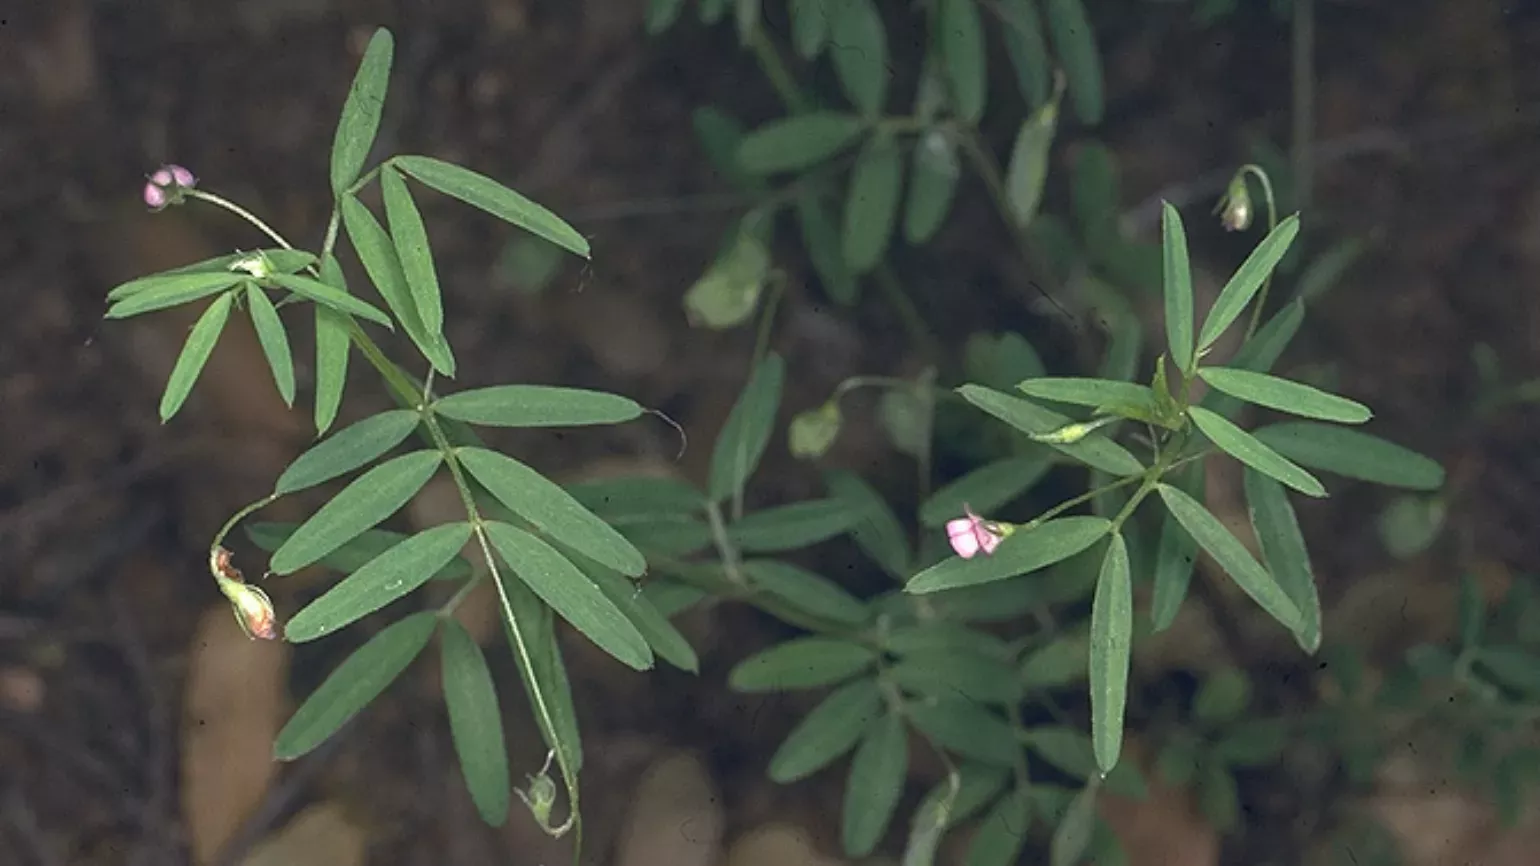 A green lentil plant with long thin leaves